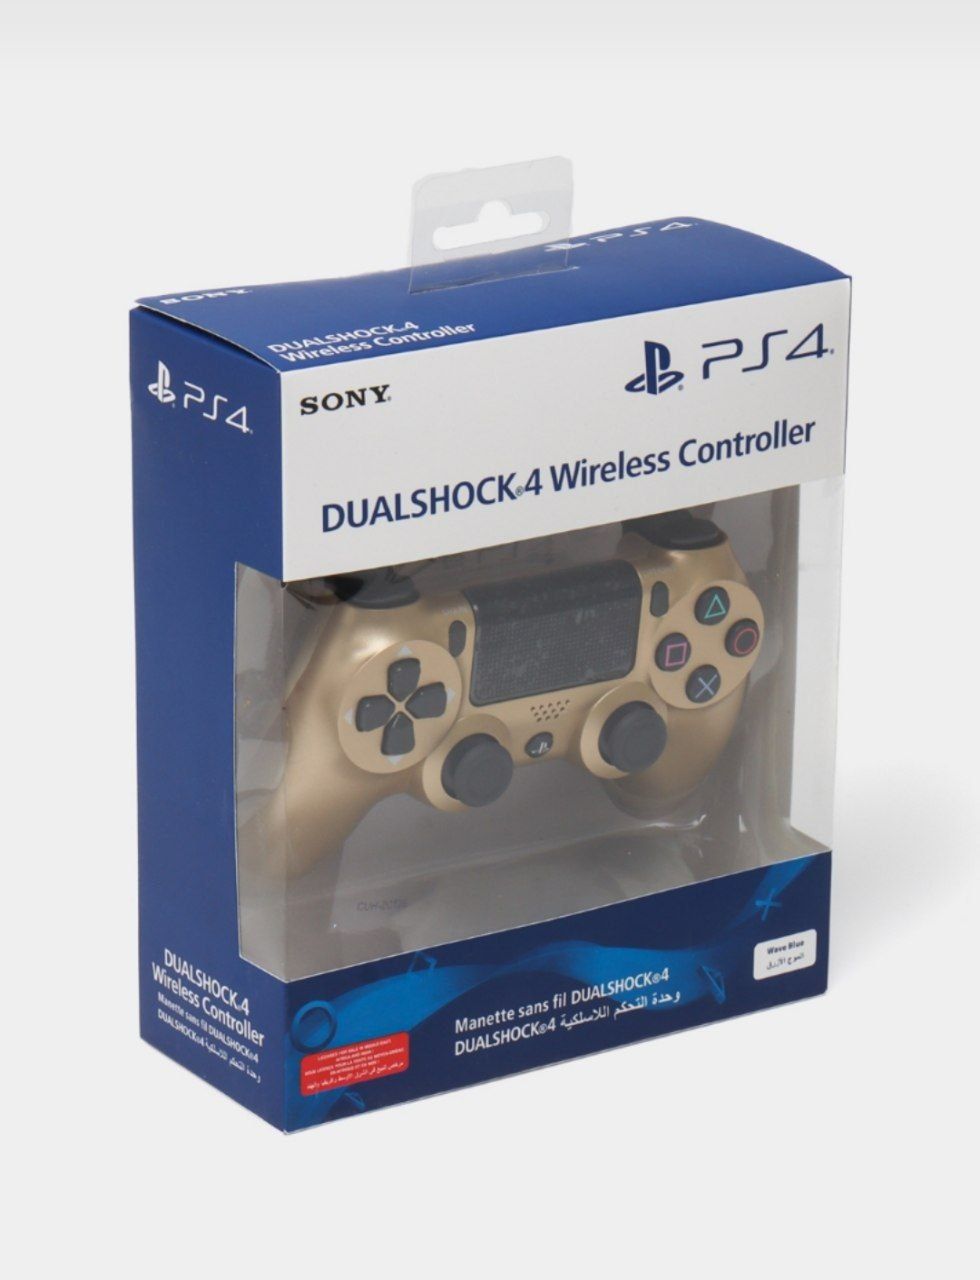 PS4 Dual shock wireless controller